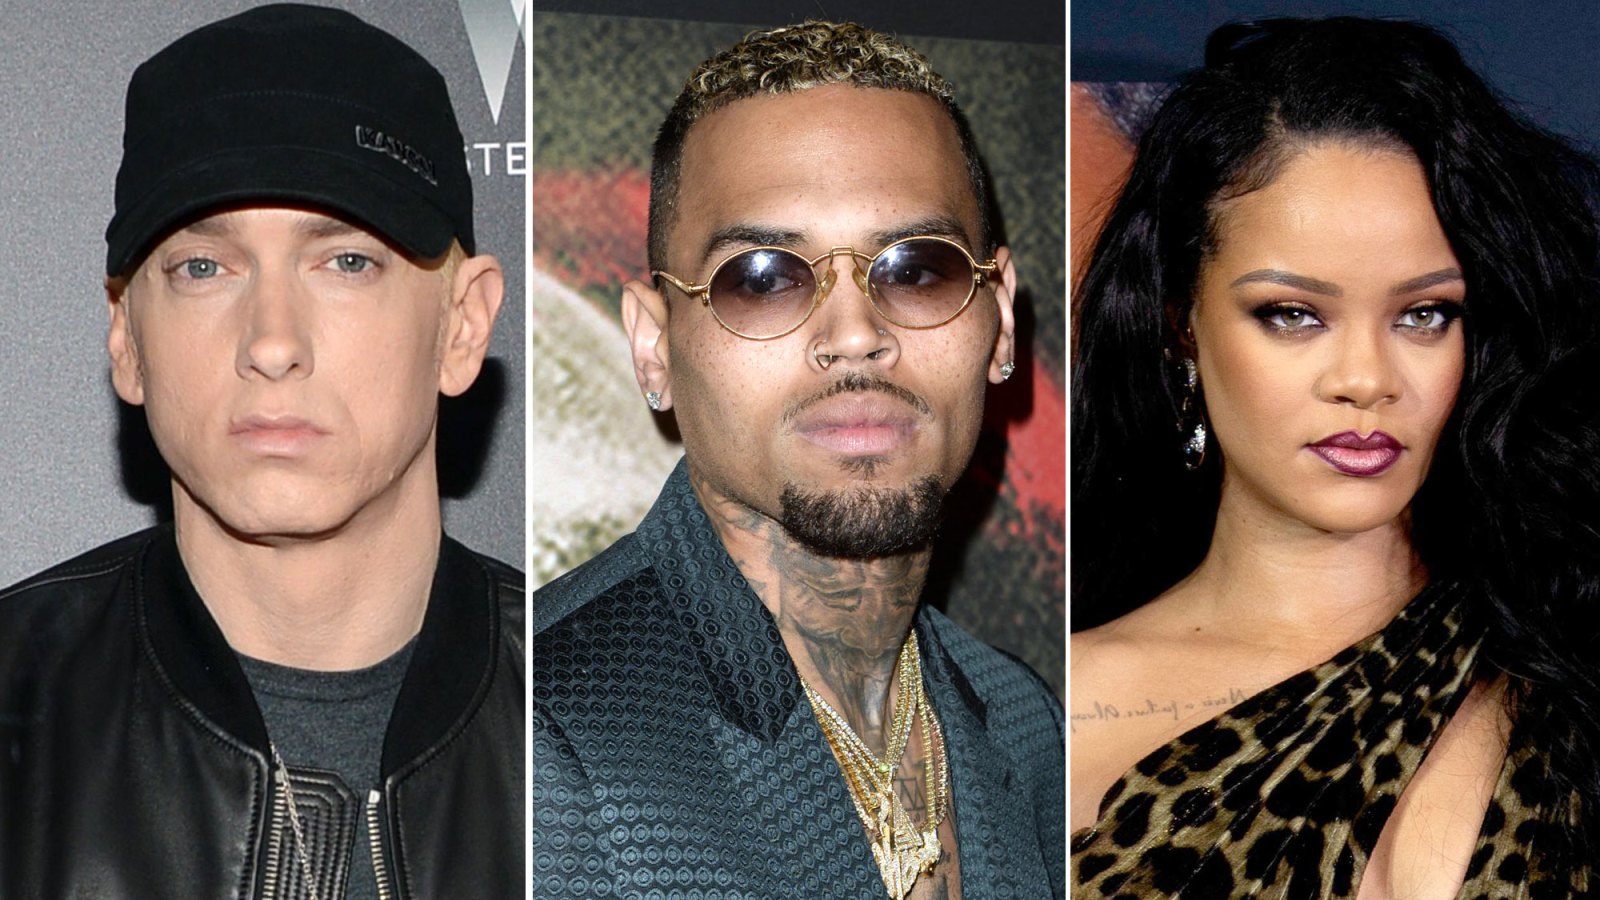 Eminem Sides With Chris Brown Over Rihanna Assault in Leaked Song